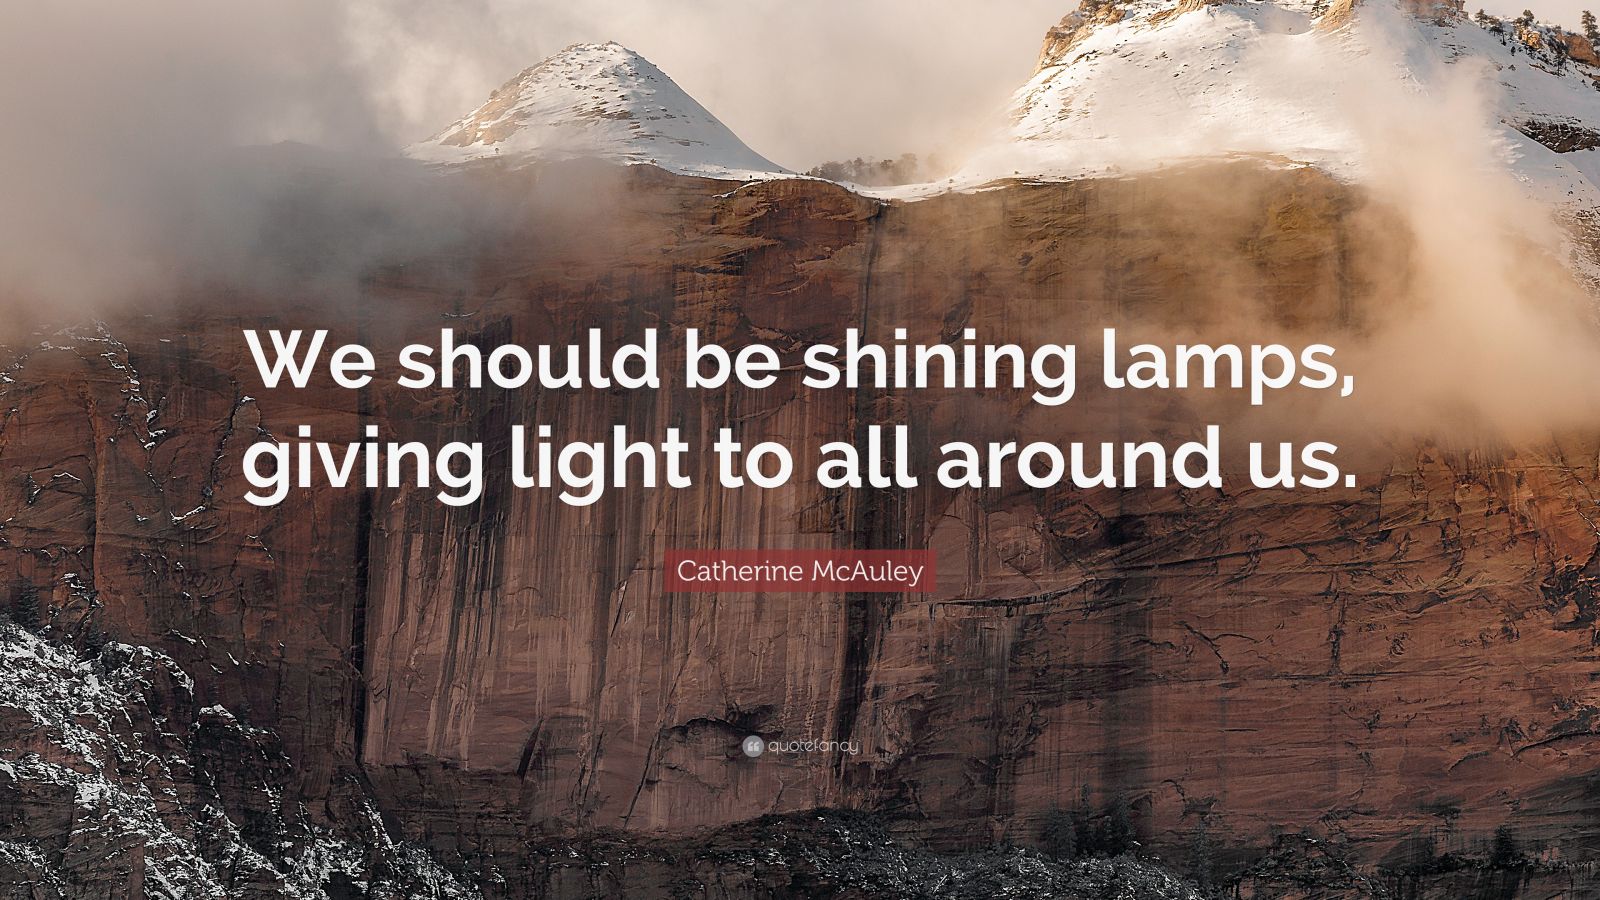 Catherine Mcauley Quote: “We Should Be Shining Lamps, Giving Light To